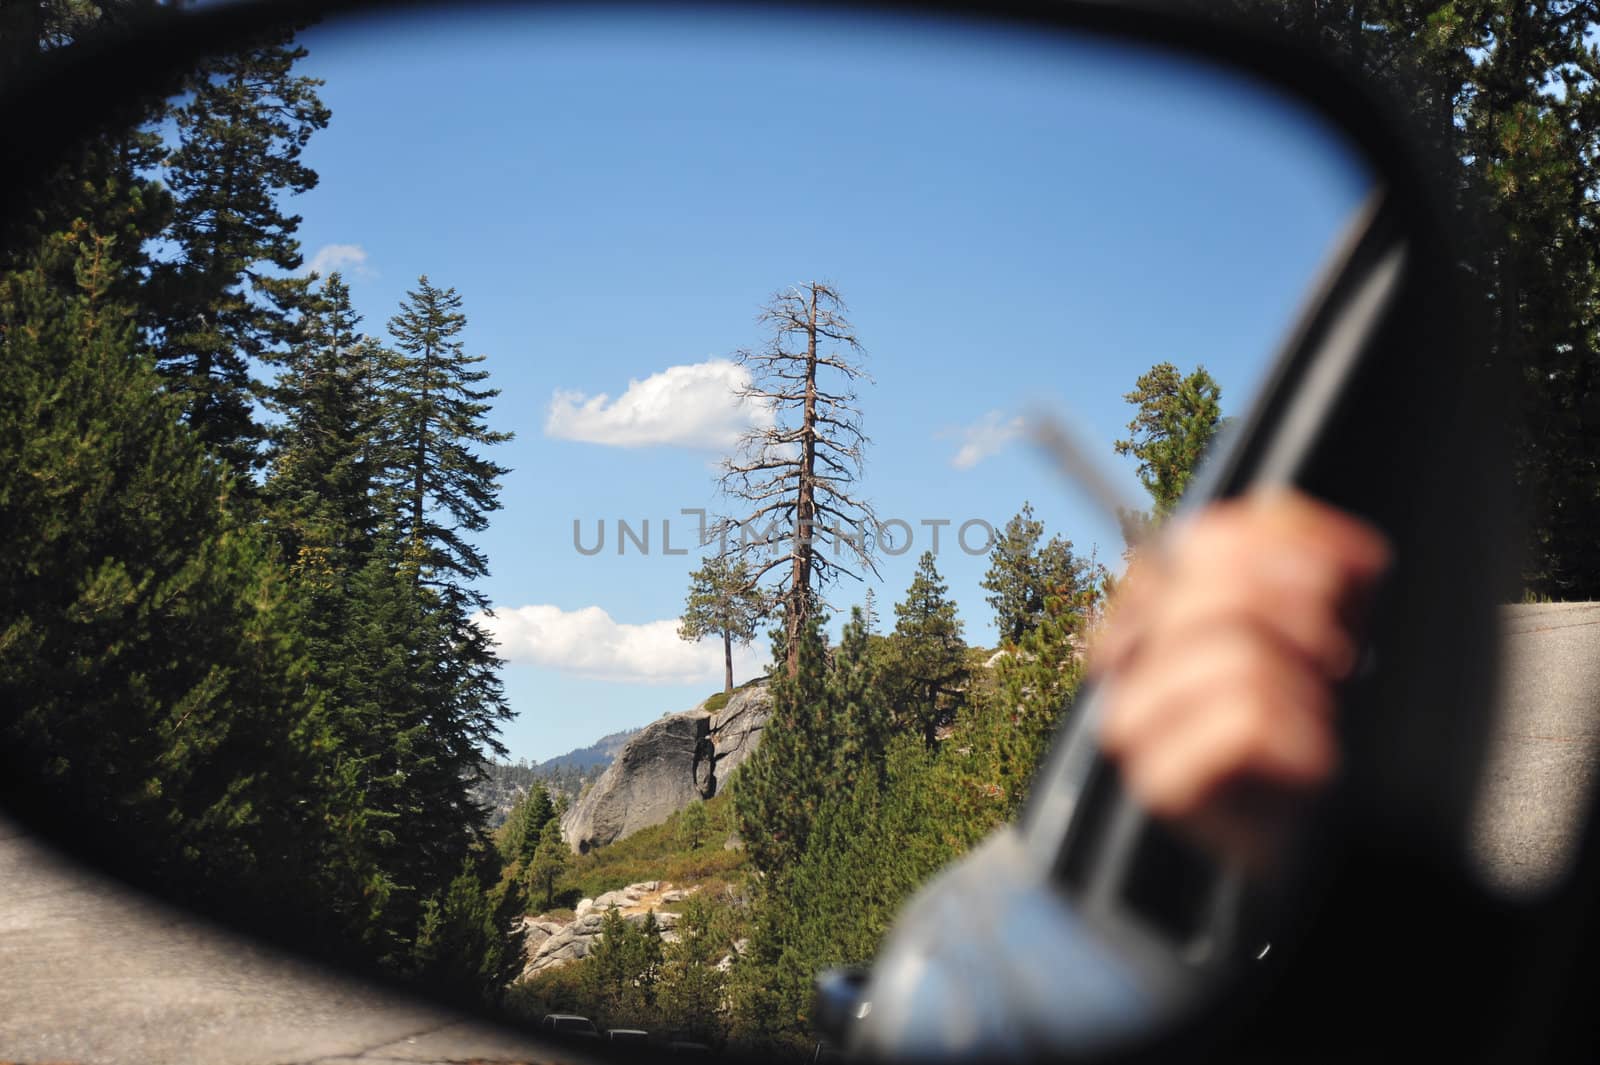 Looking at the scenic view  in the side view mirror of a car